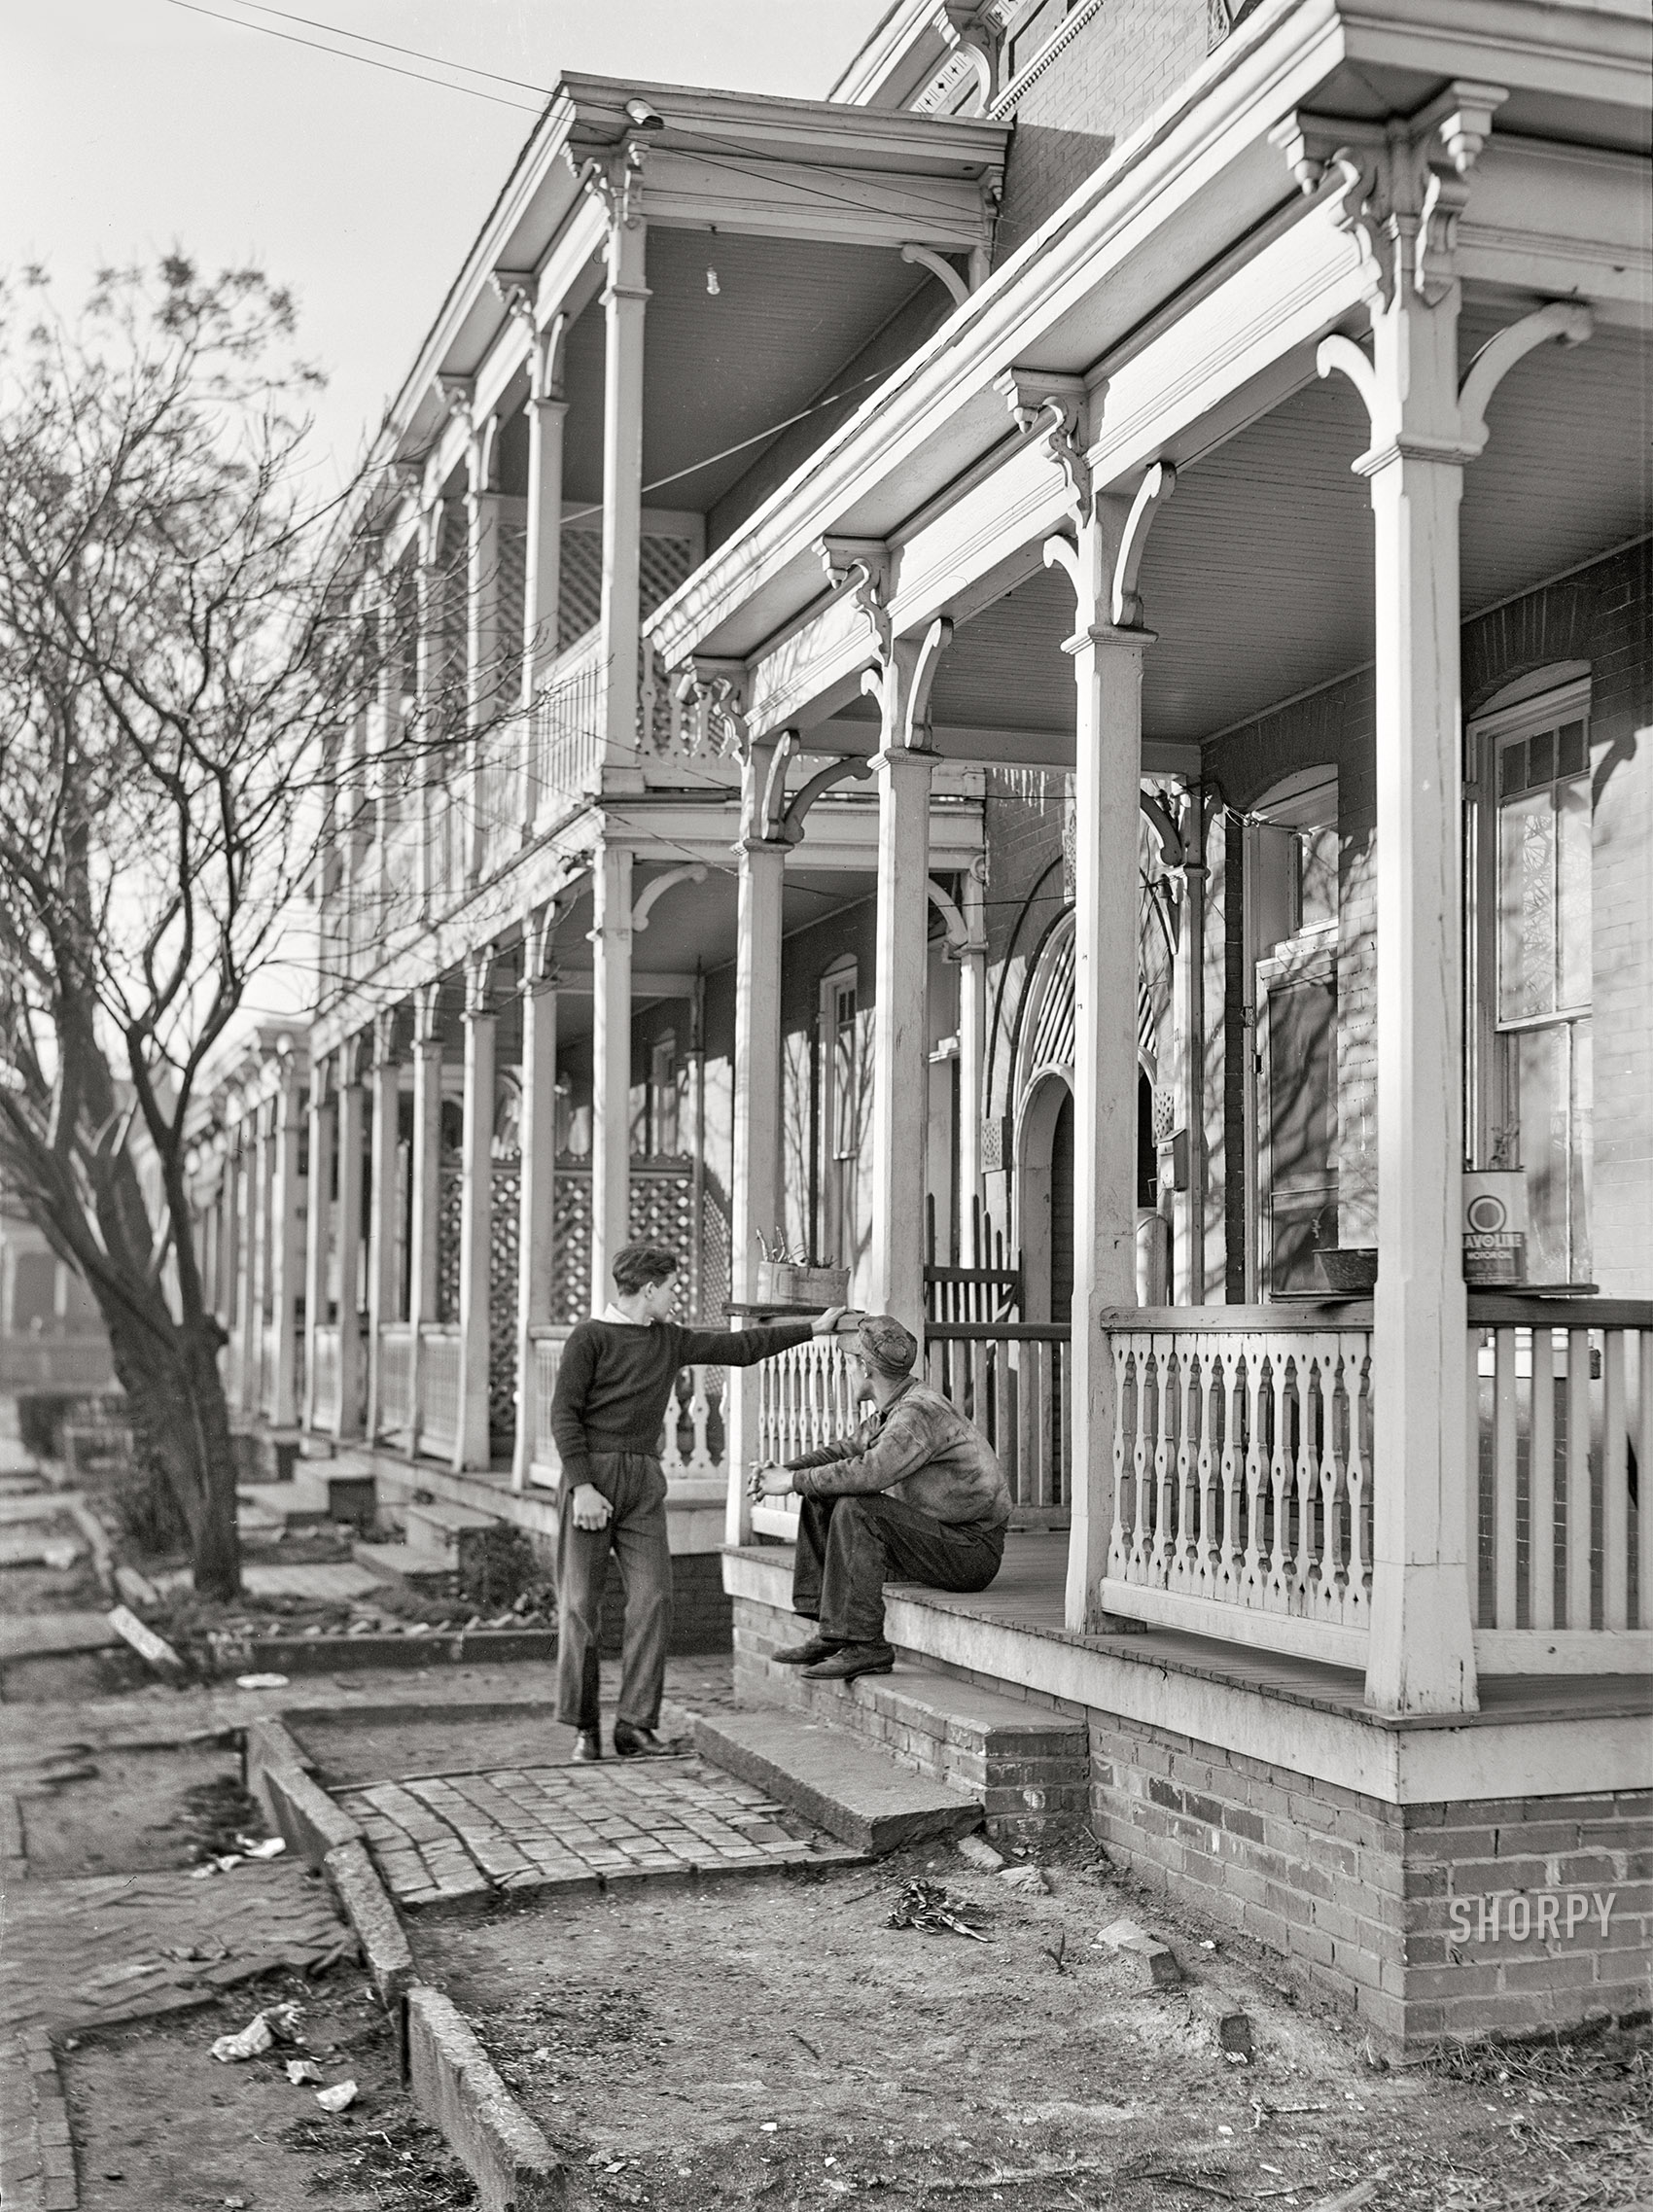 March 1941. "Defense workers in front of rooming houses. Norfolk, Virginia." Medium format acetate negative by John Vachon for the Farm Security Administration. View full size.